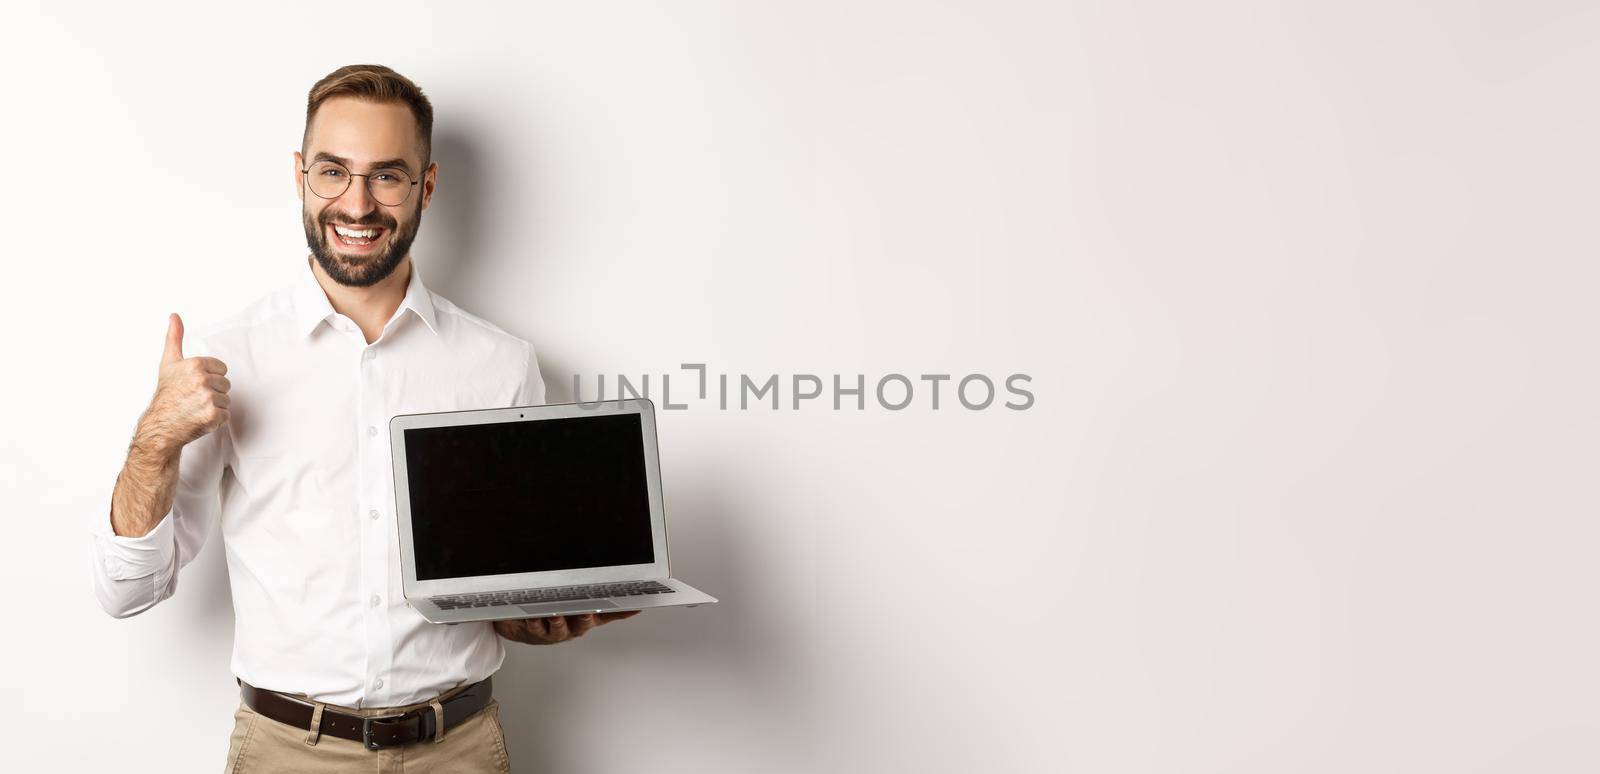 Successful business man showing laptop screen, make thumb up in approval, praise something good, standing over white background.